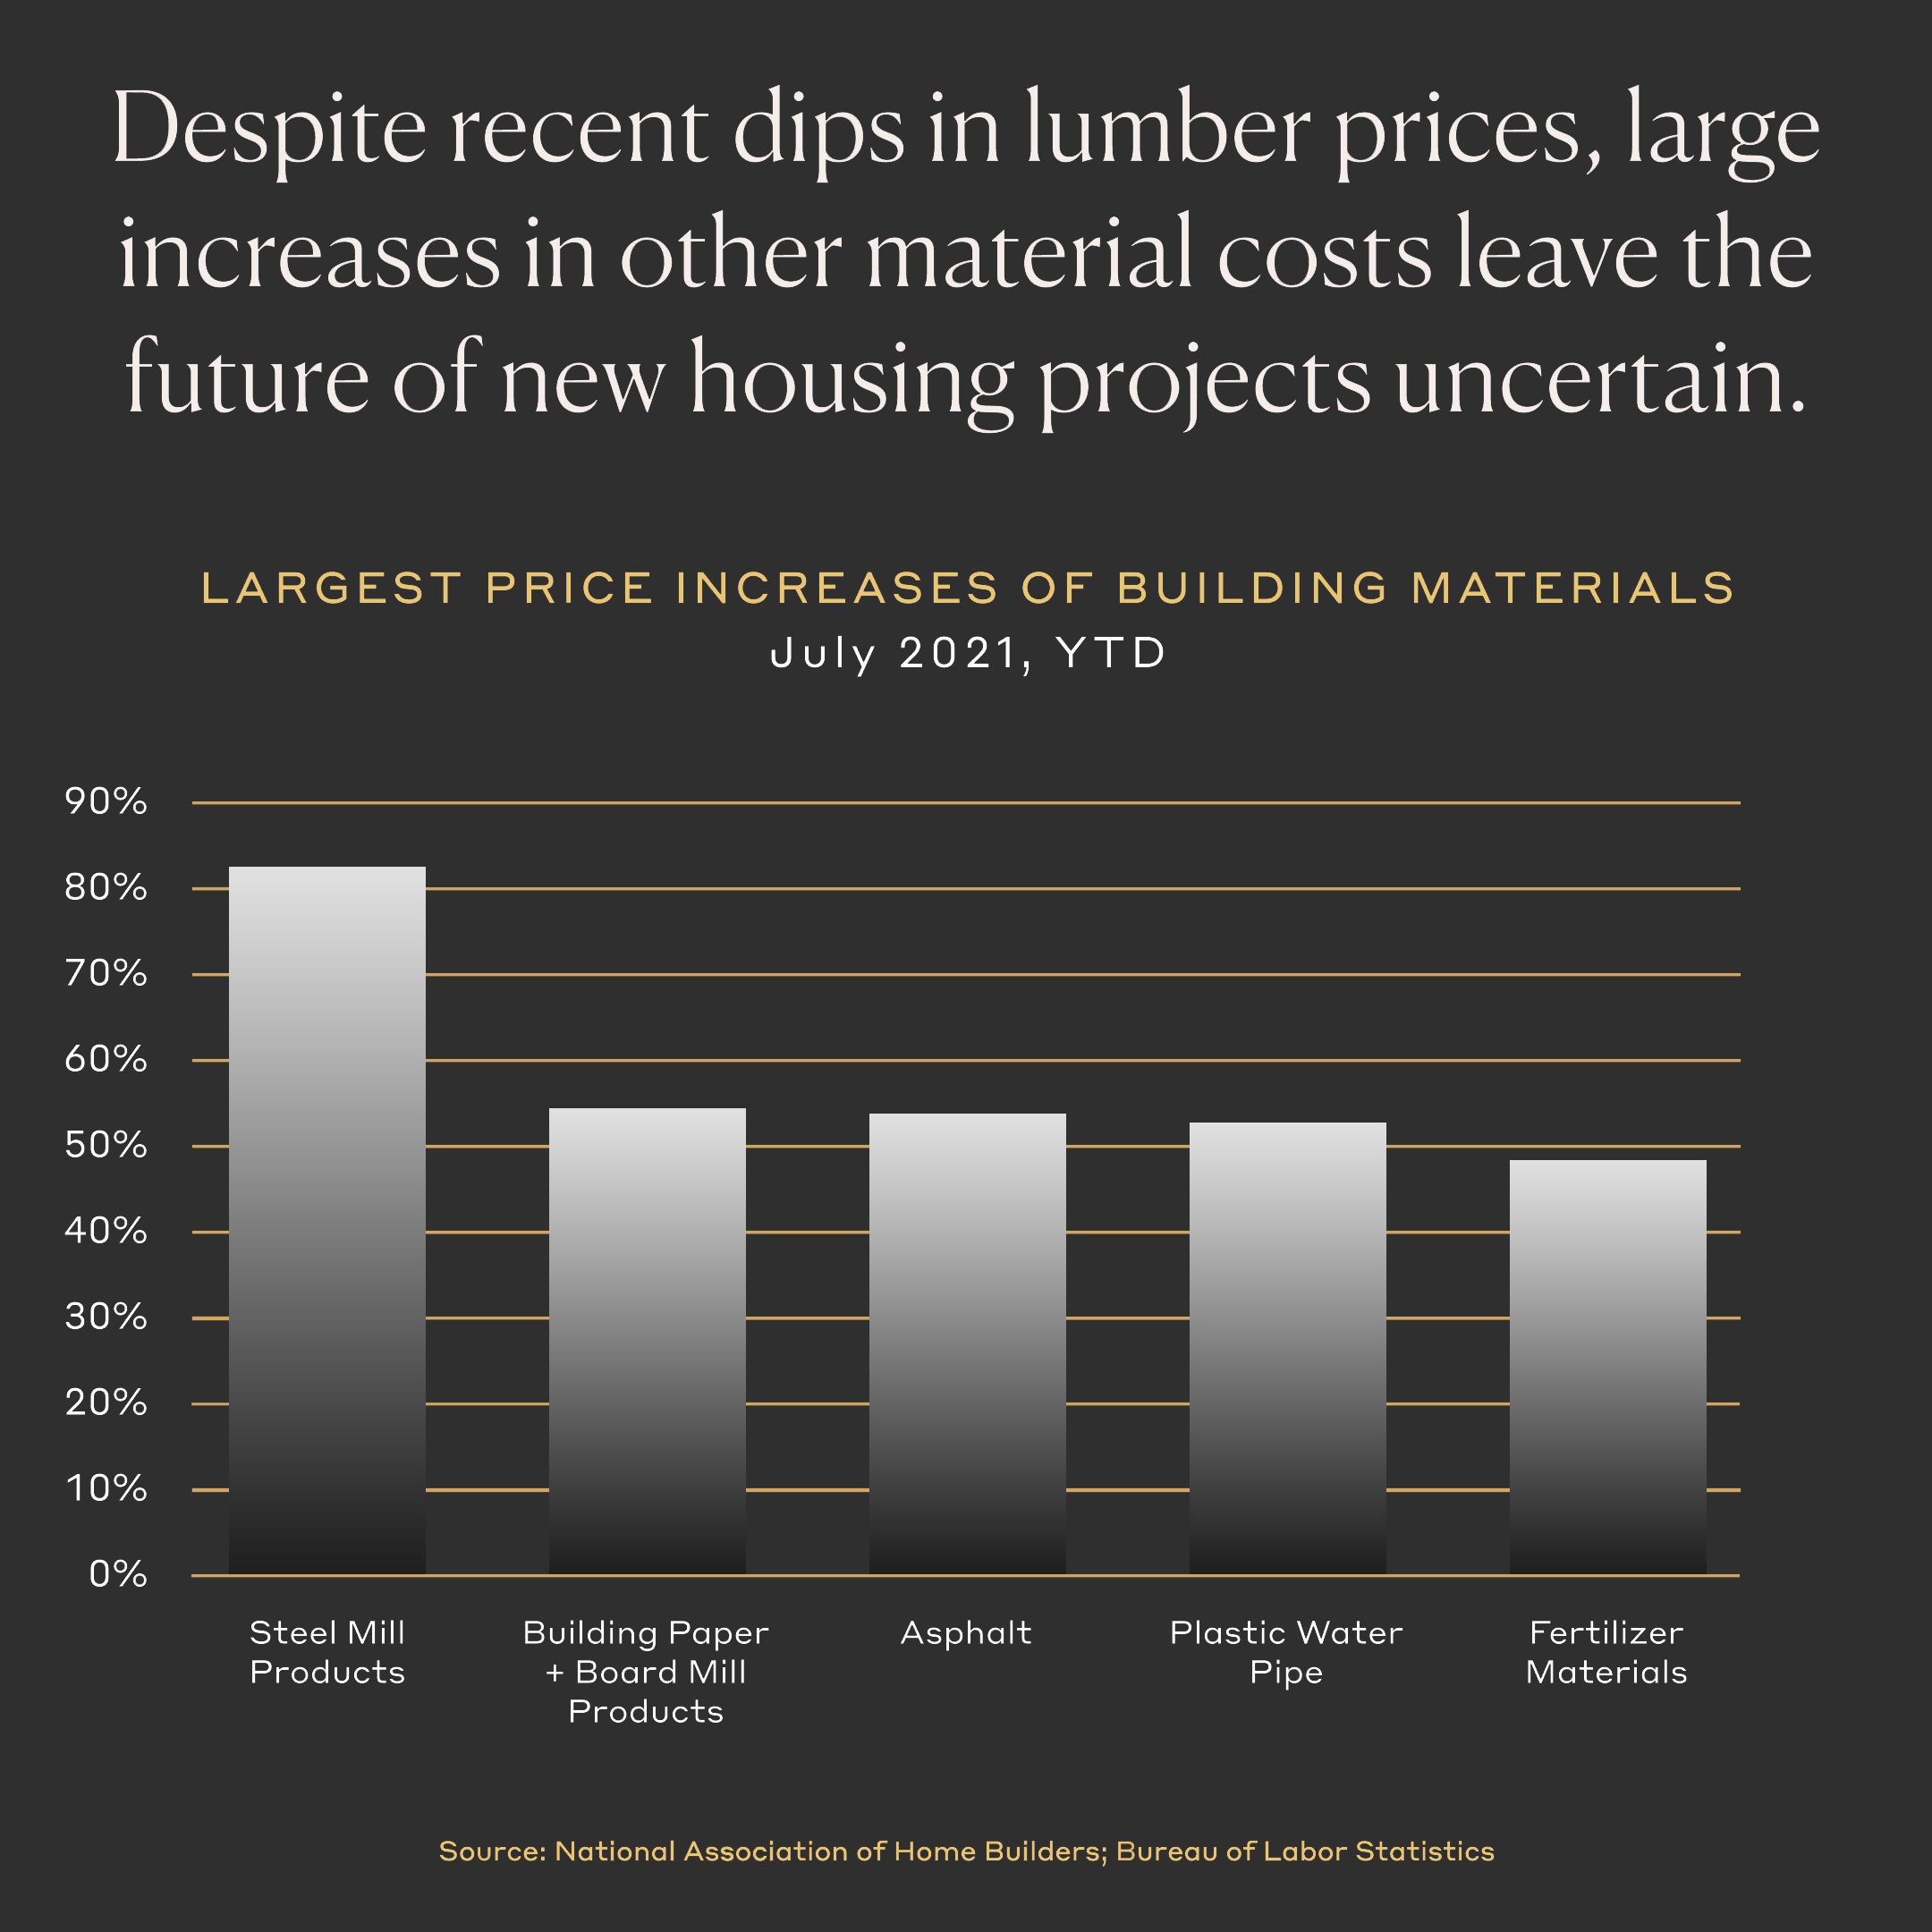 Despite recent dips in lumber prices, large increases in other material costs leave the future of new housing projects uncertain.